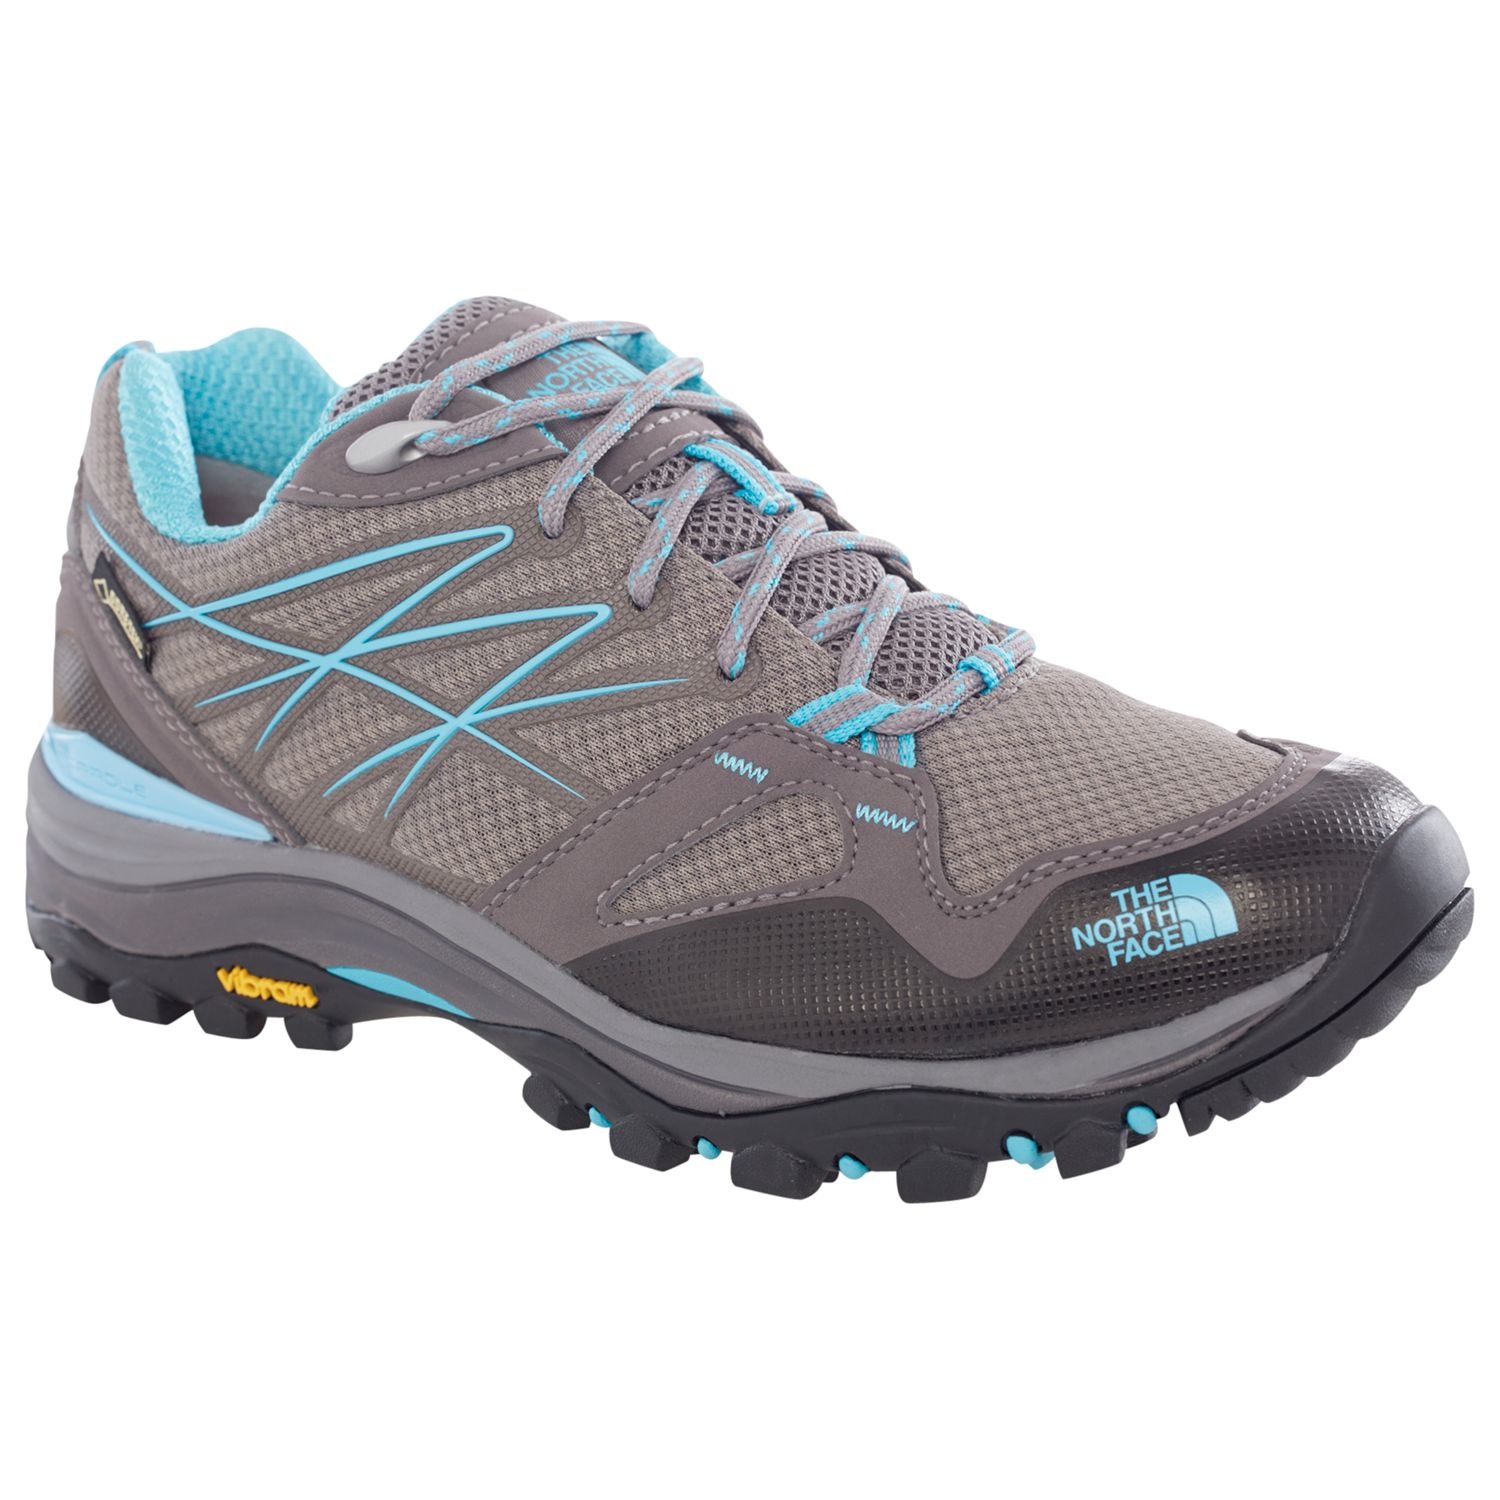 The North Face Hedgehog Fastpack GTX Women's Hiking Shoe, Grey/Blue at ...